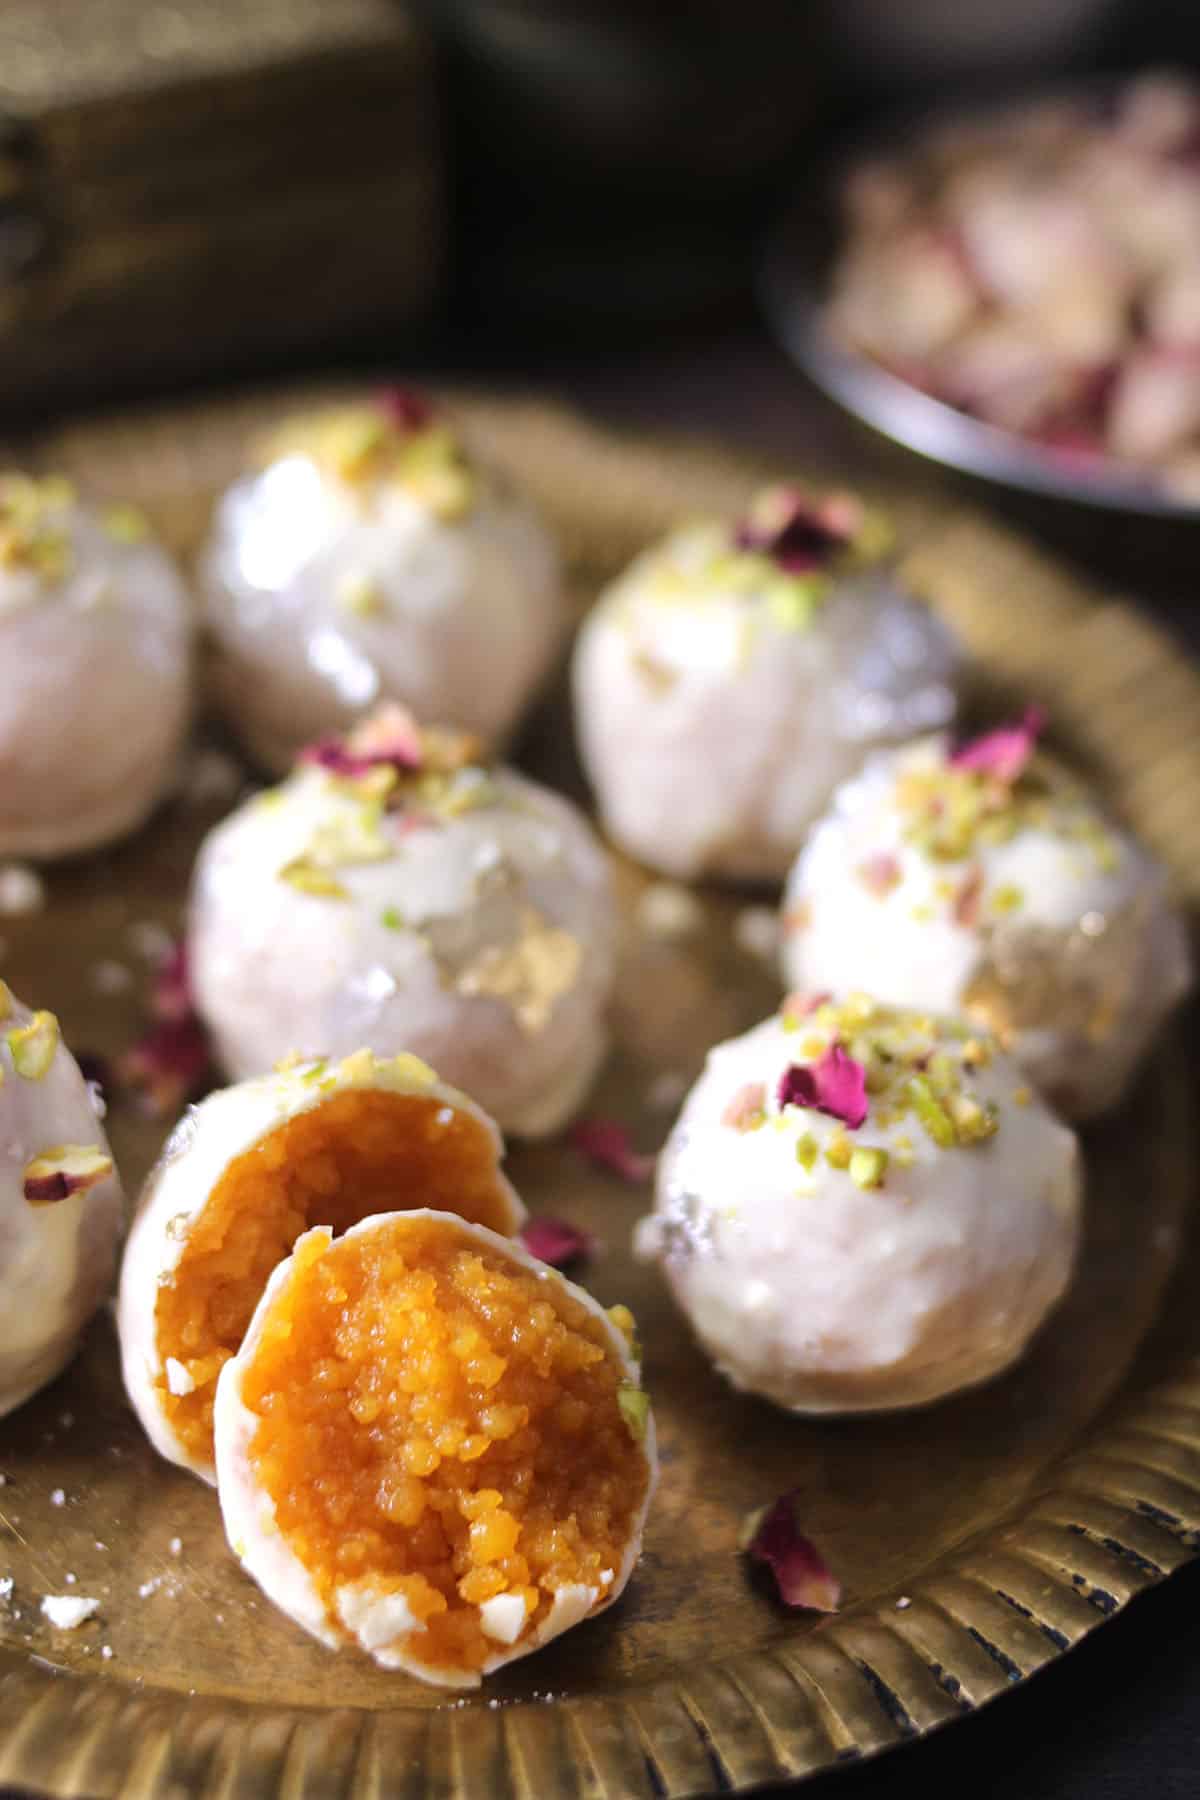 melt in mouth halwai style motichur laddu coated in white chocolate - unique diwali sweet 